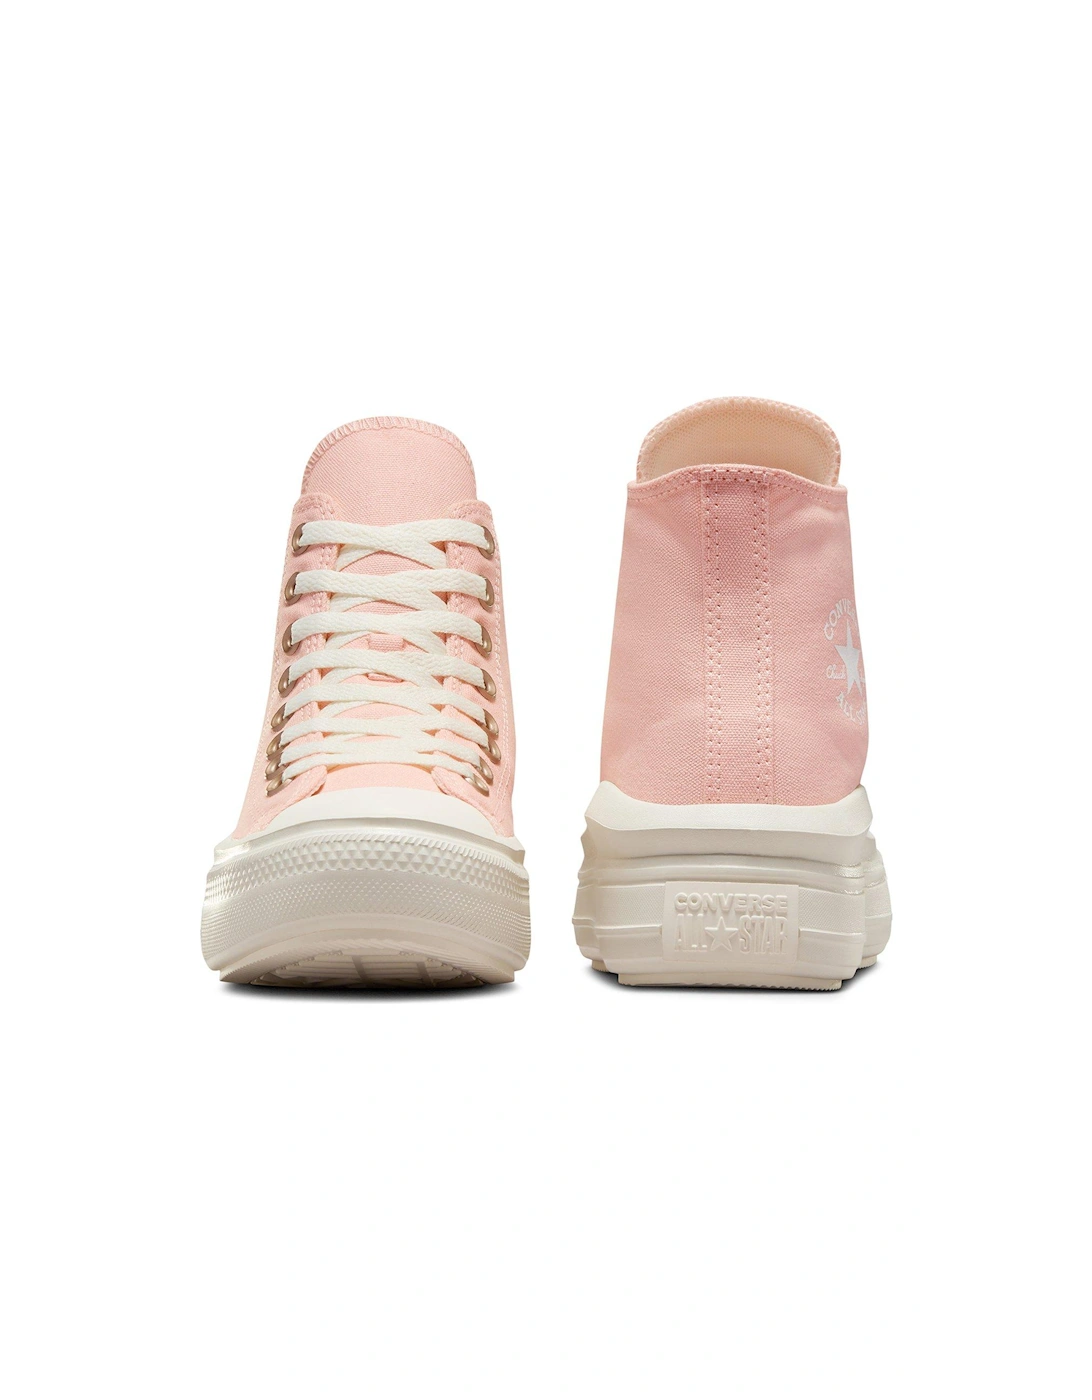 Womens Move Crafted Color High Tops Trainers - Peach/White